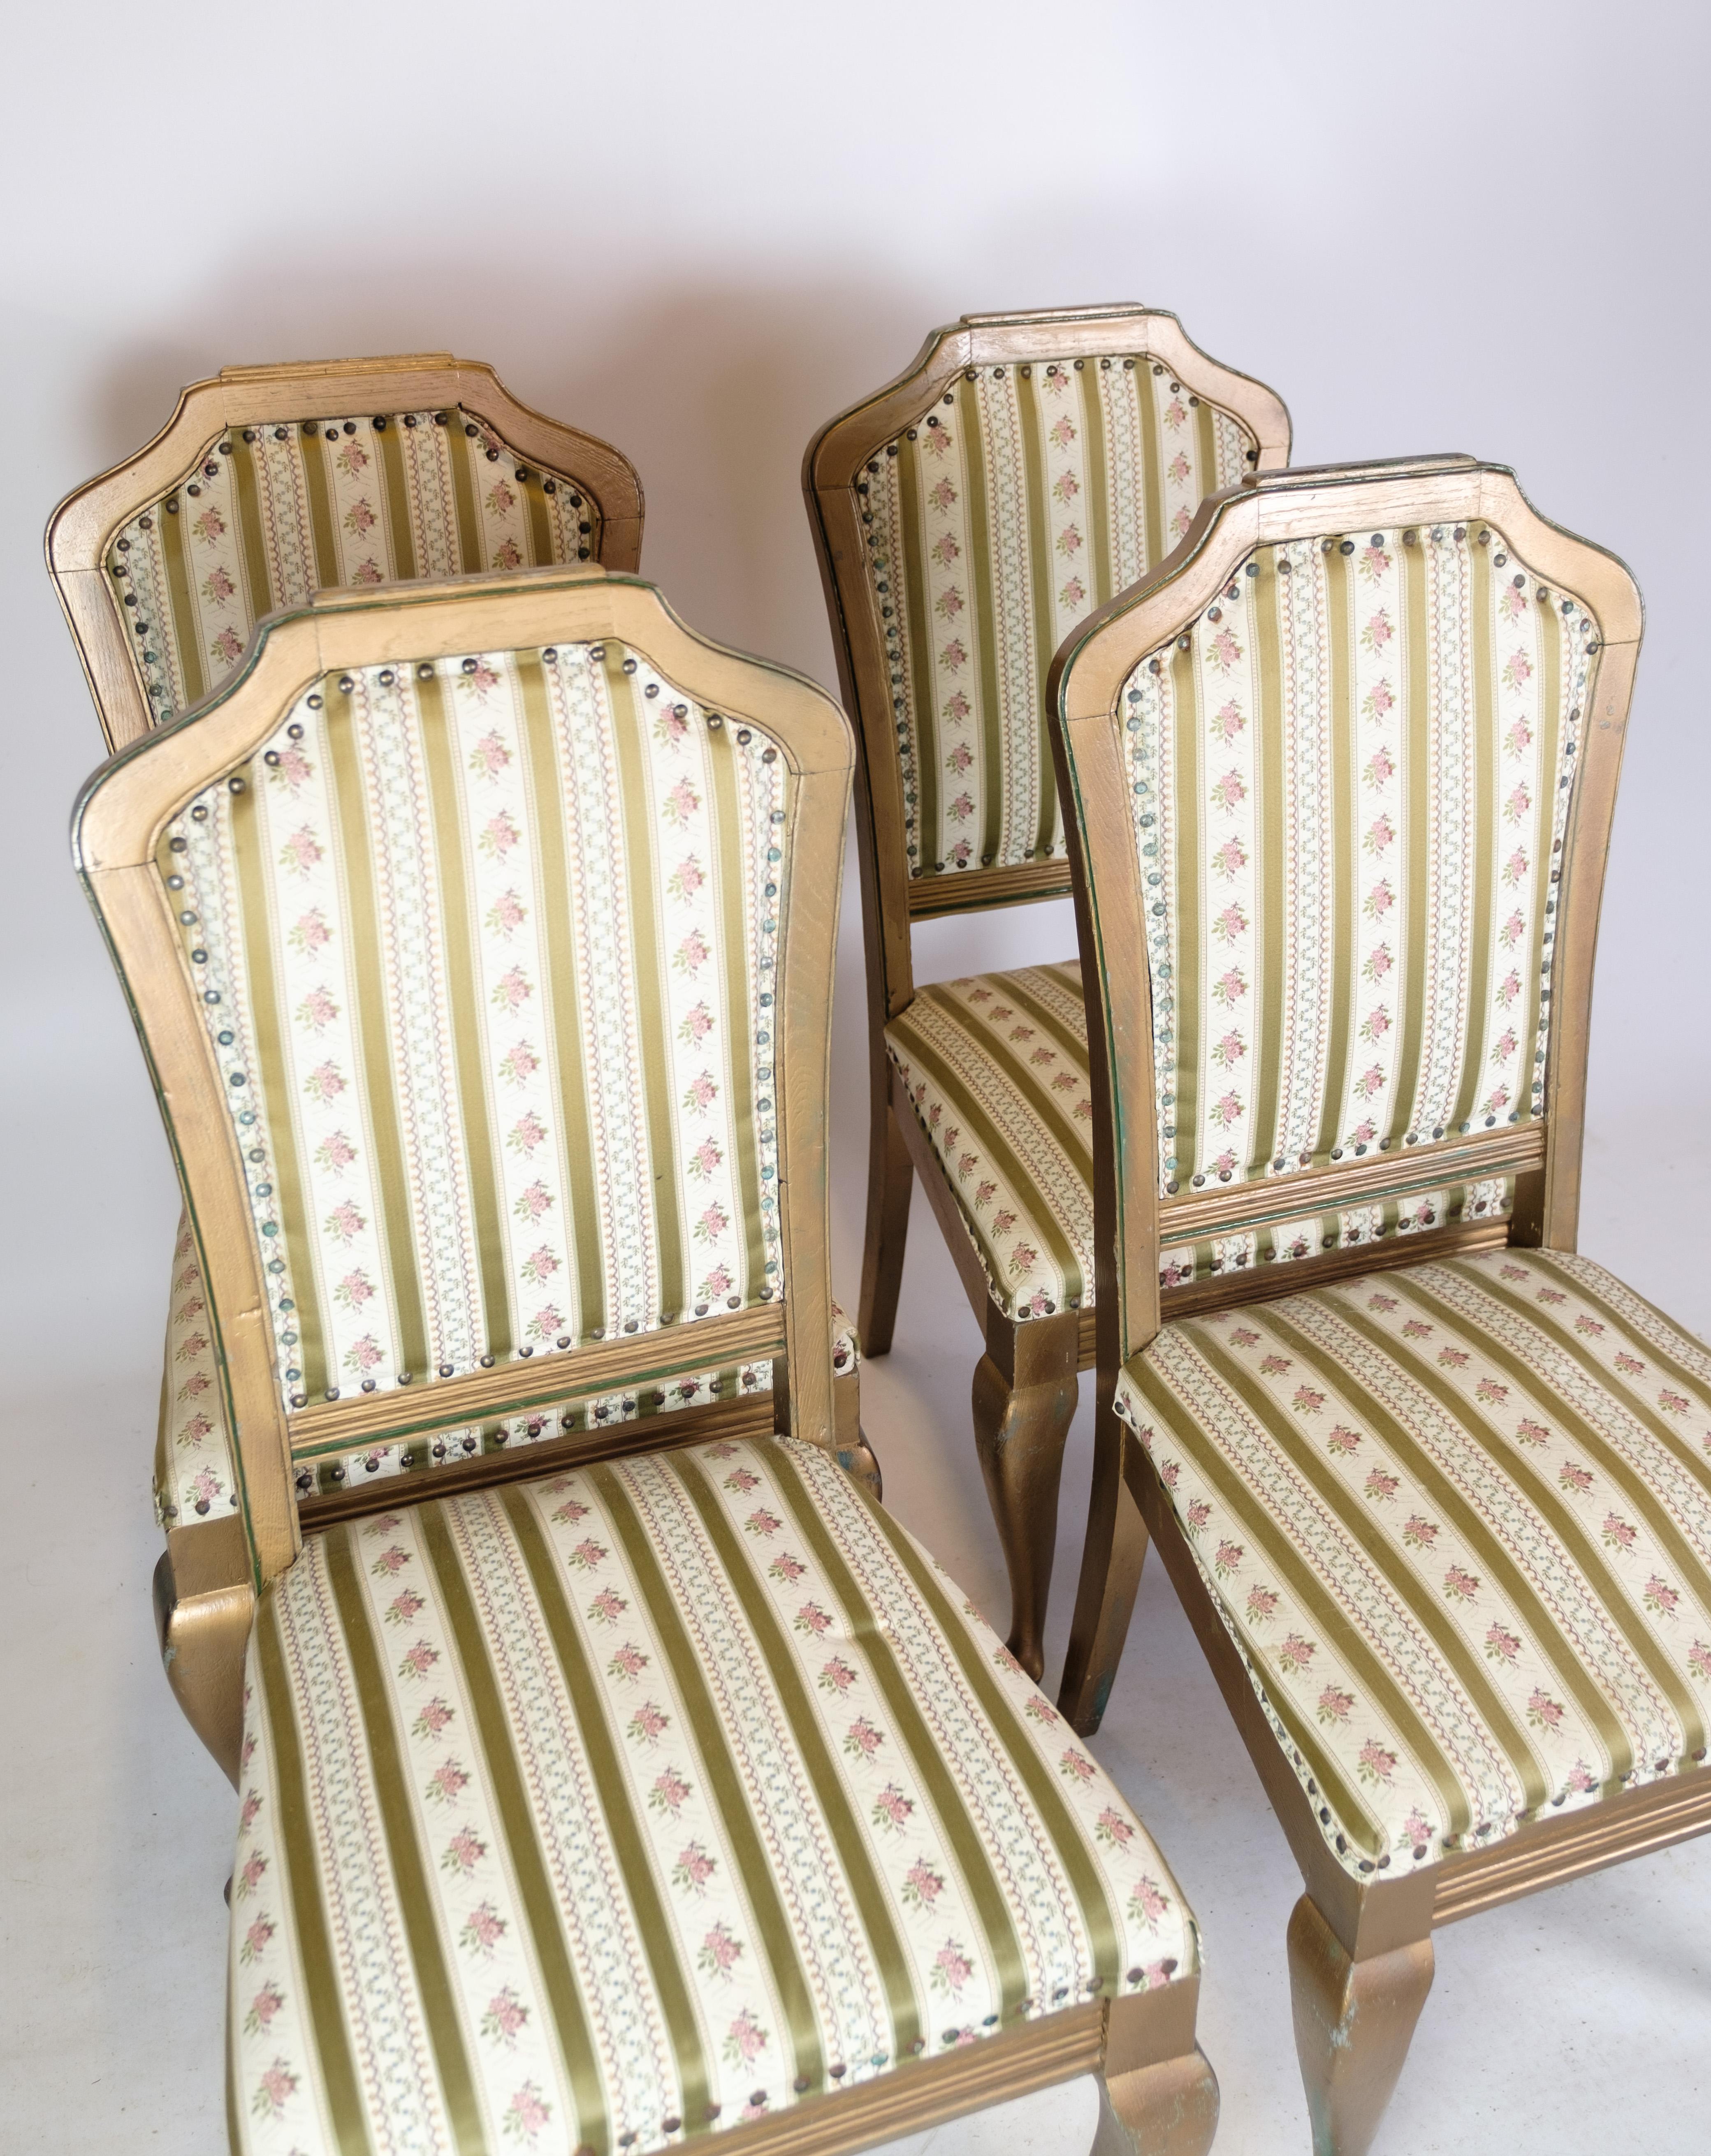 Set of four antique rococo chairs in gilded wood with striped fabric from around the 1930s.
Dimensions in cm: H102 W:48 D:45 SH:42